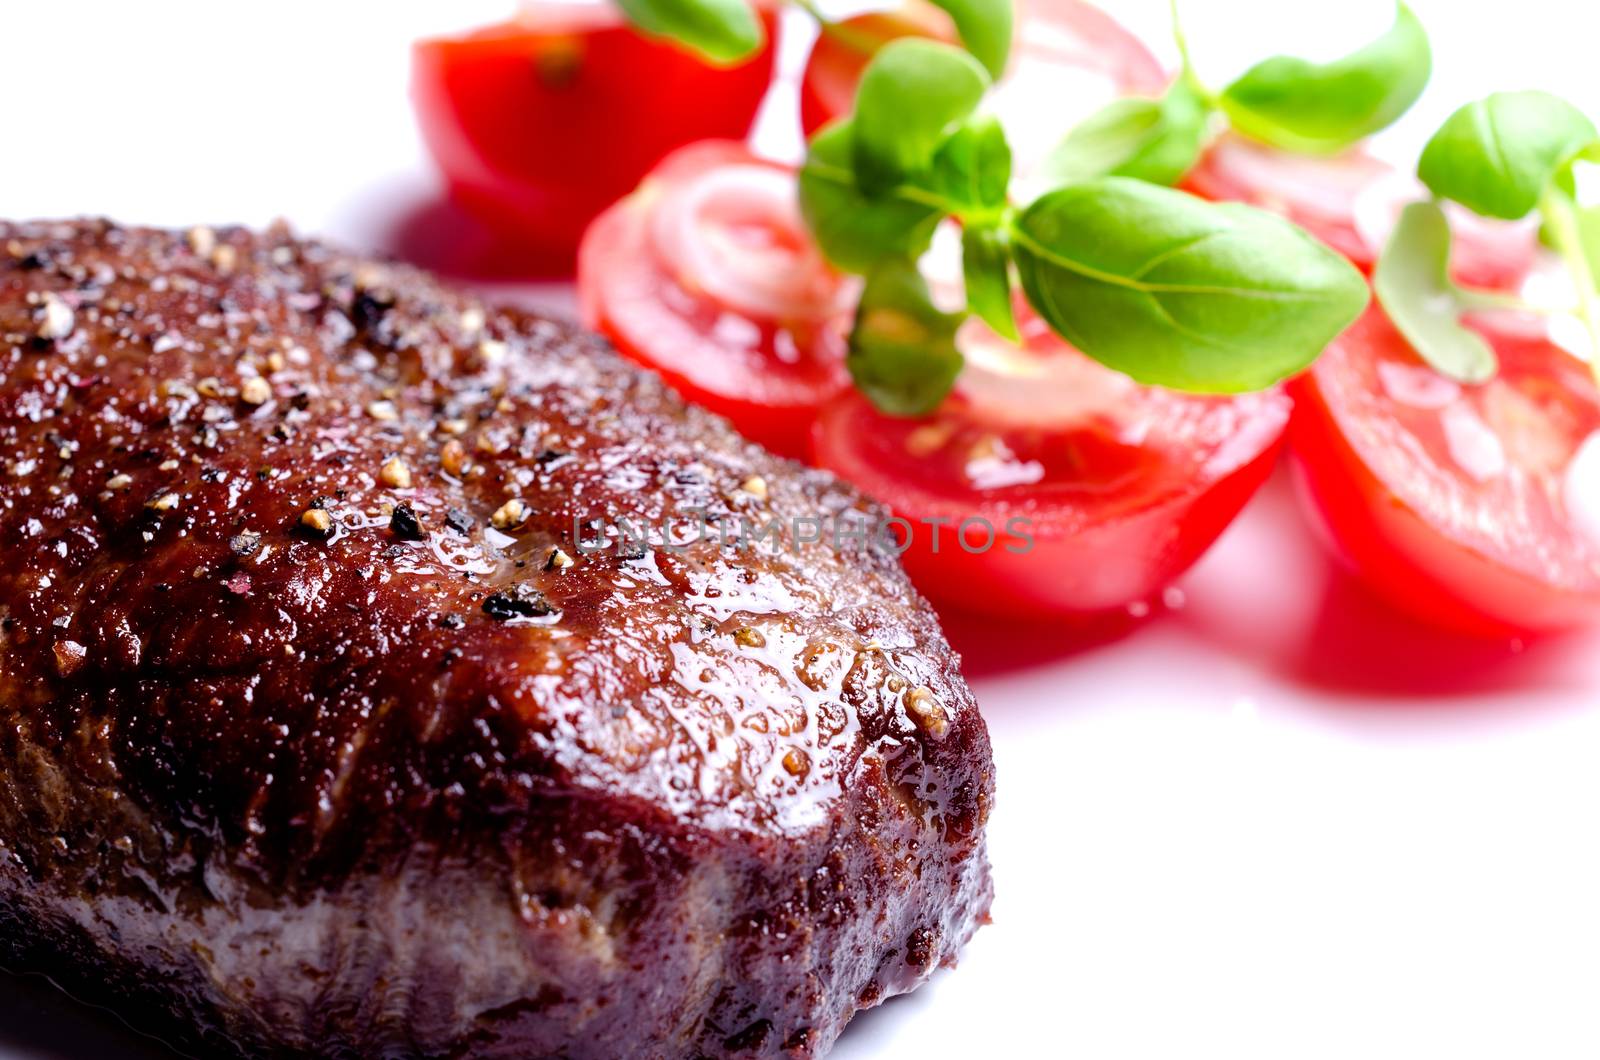 Grilled steak with tomatoes and oregano leafs by Nanisimova